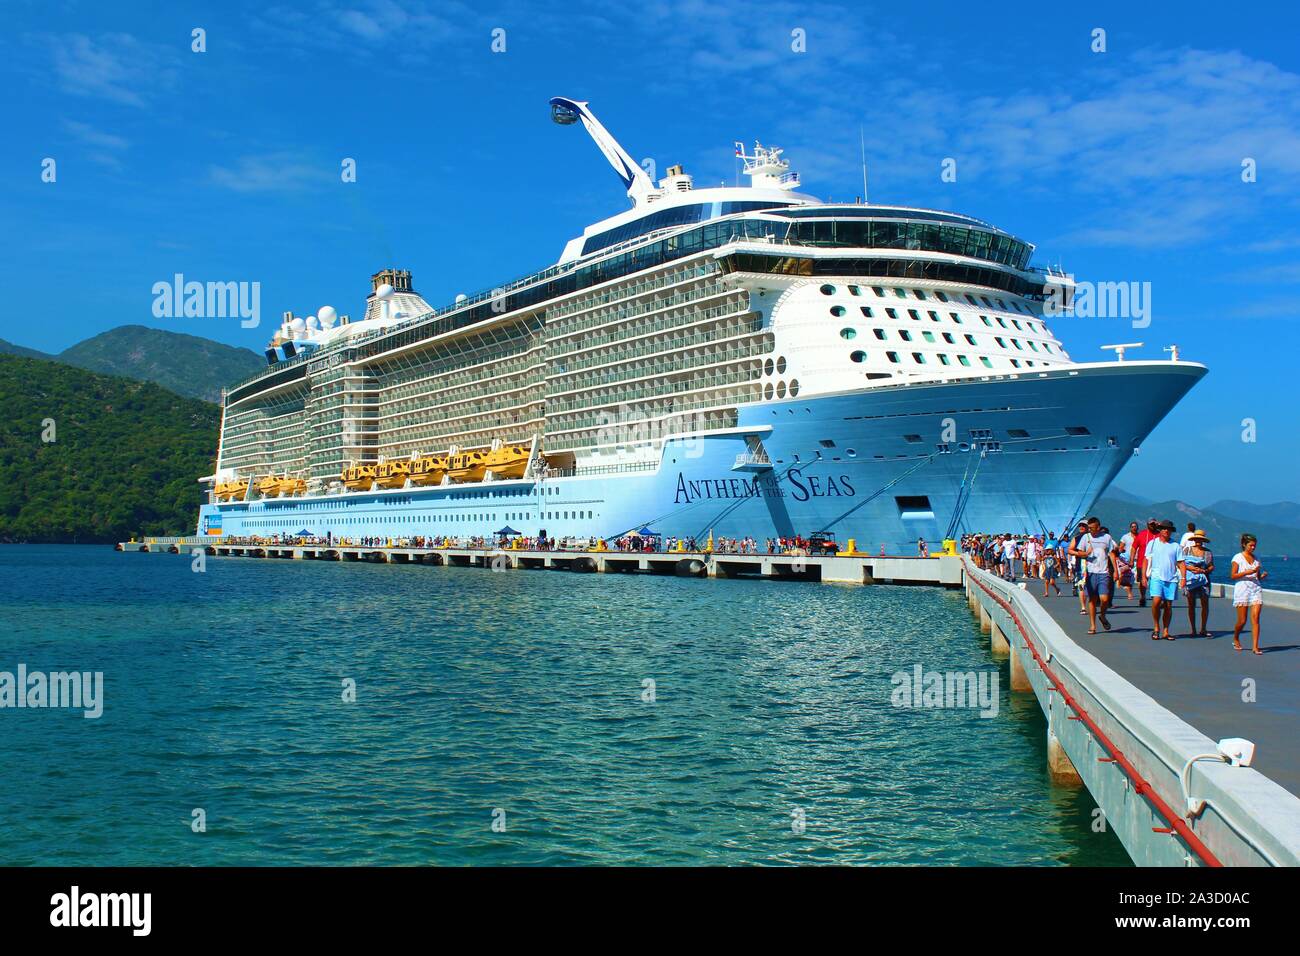 The Royal Caribbean Anthem Of The Seas cruise ship, docked in port in Labadee, Haiti, which is a resort privately owned by Royal Caribbean. Stock Photo